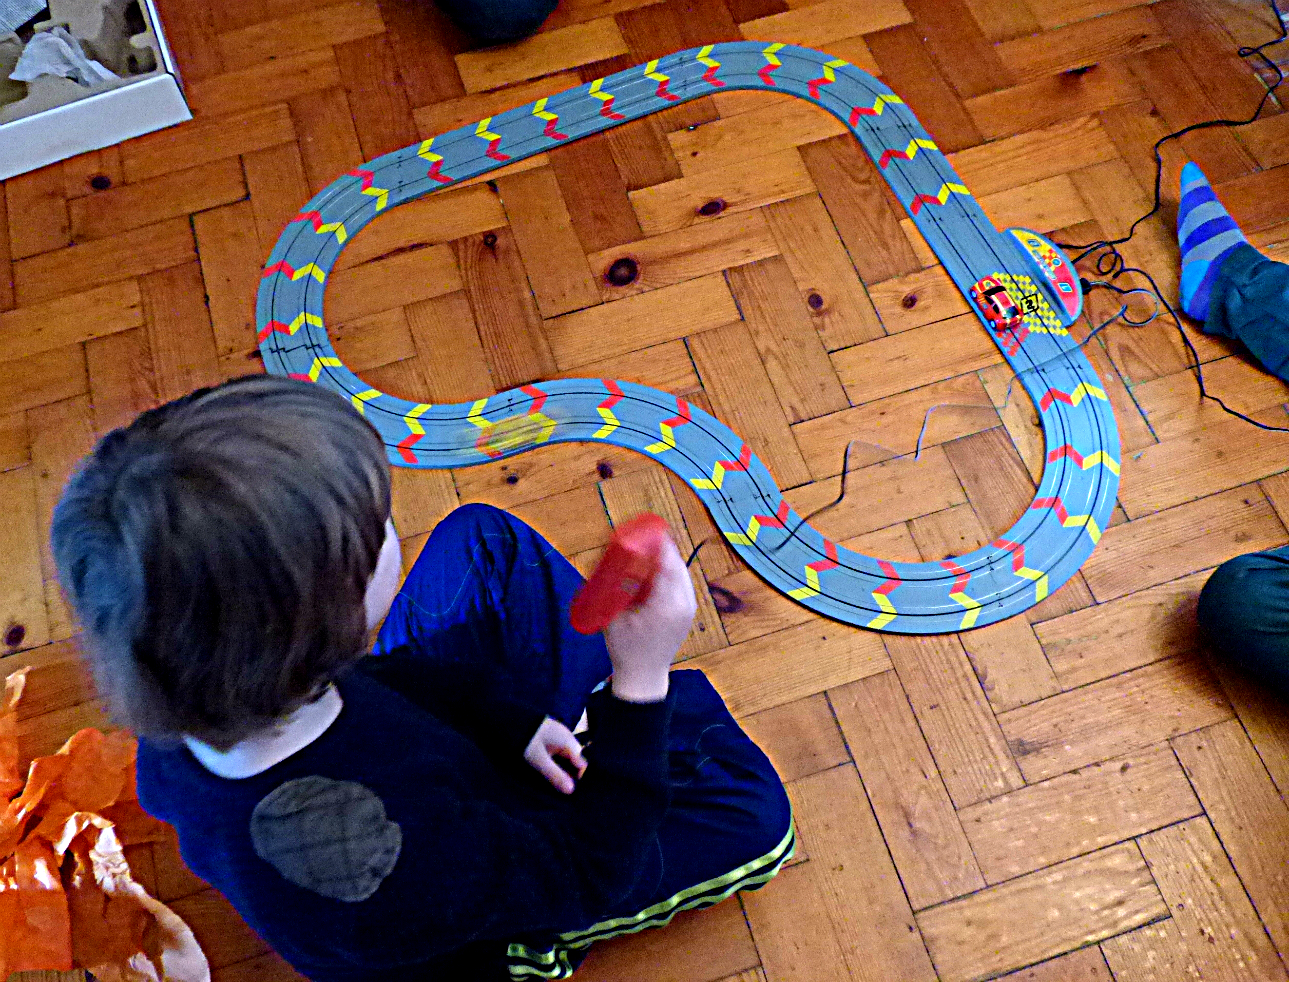 My First Scalextric review - Chilling with Lucas